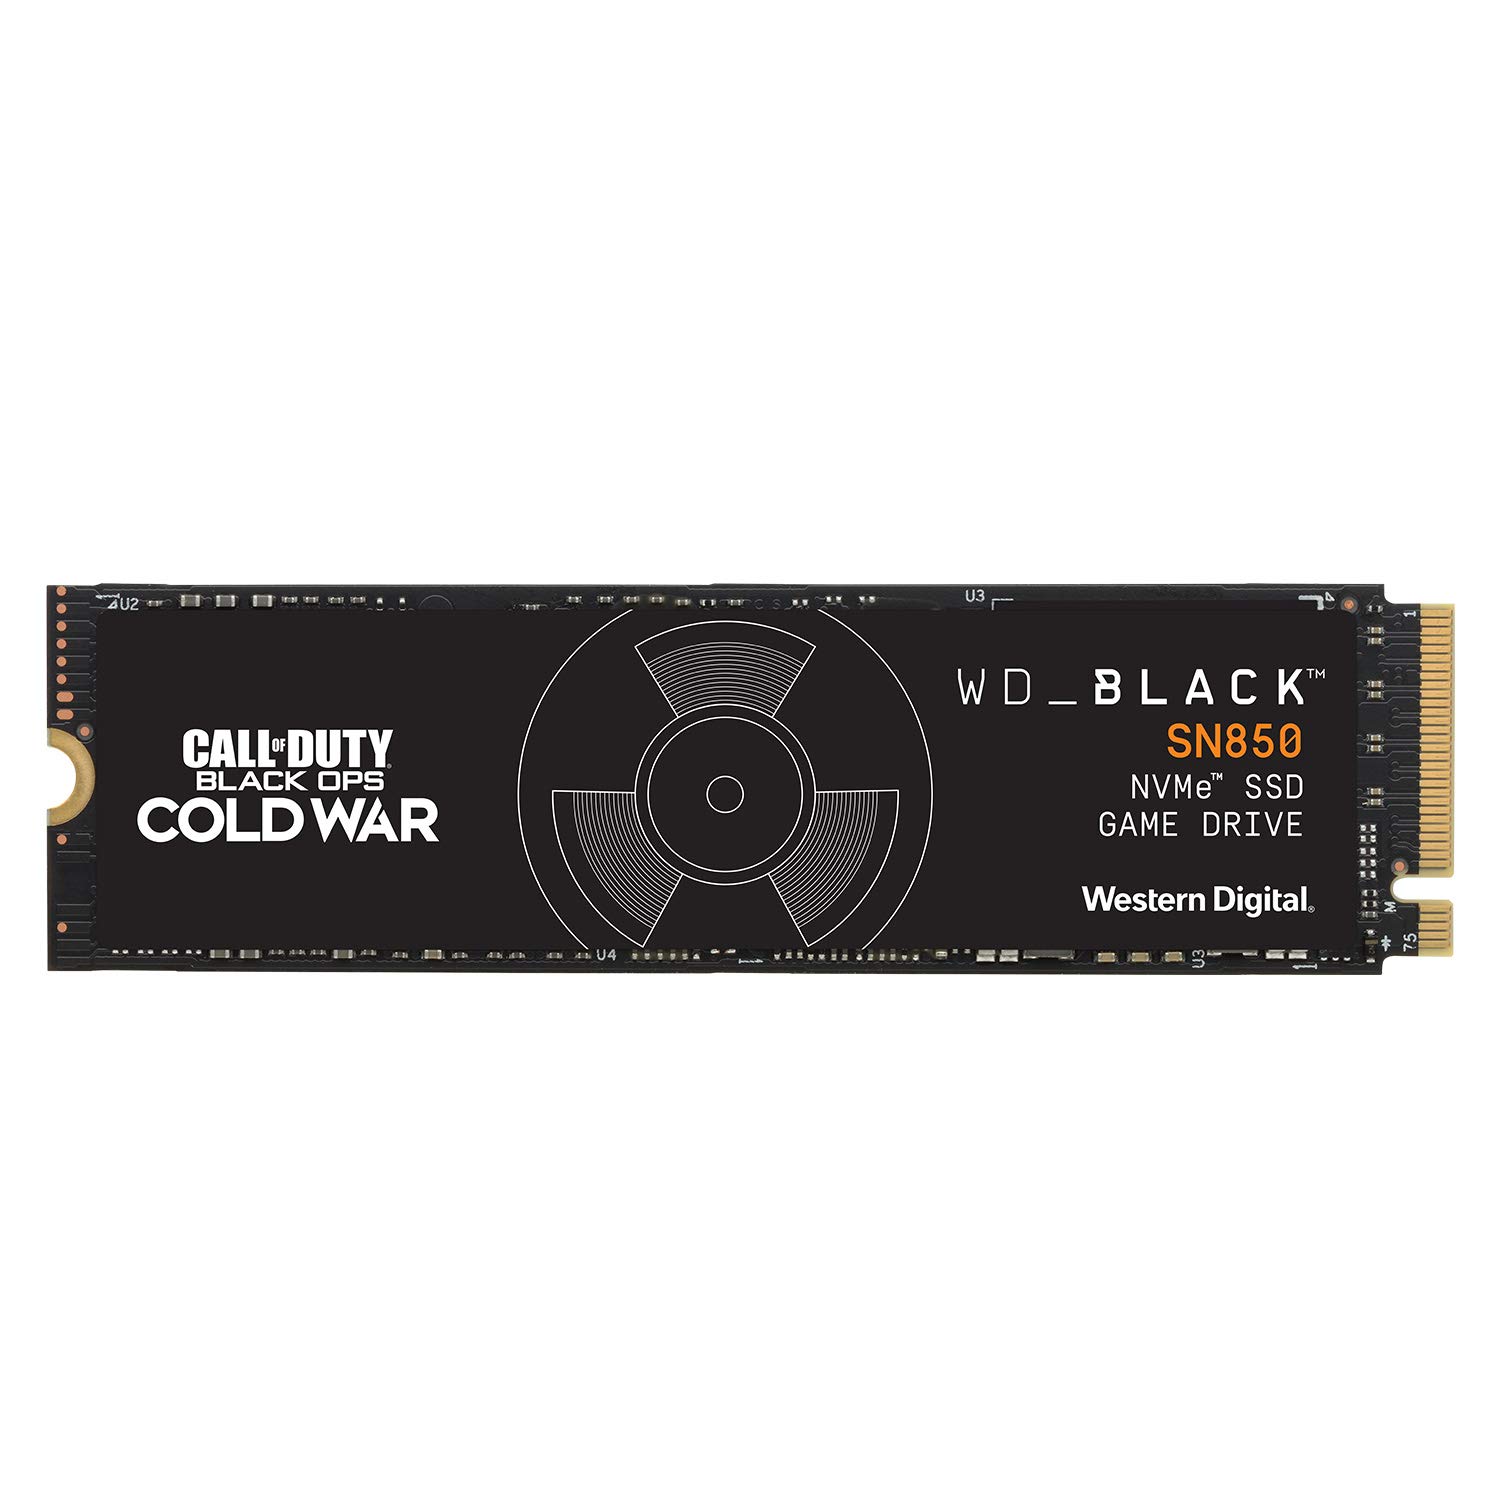 WD_BLACK SN850 1TB NVMe SSD Game Drive, Call of Duty: Black Ops Cold War Special Edition